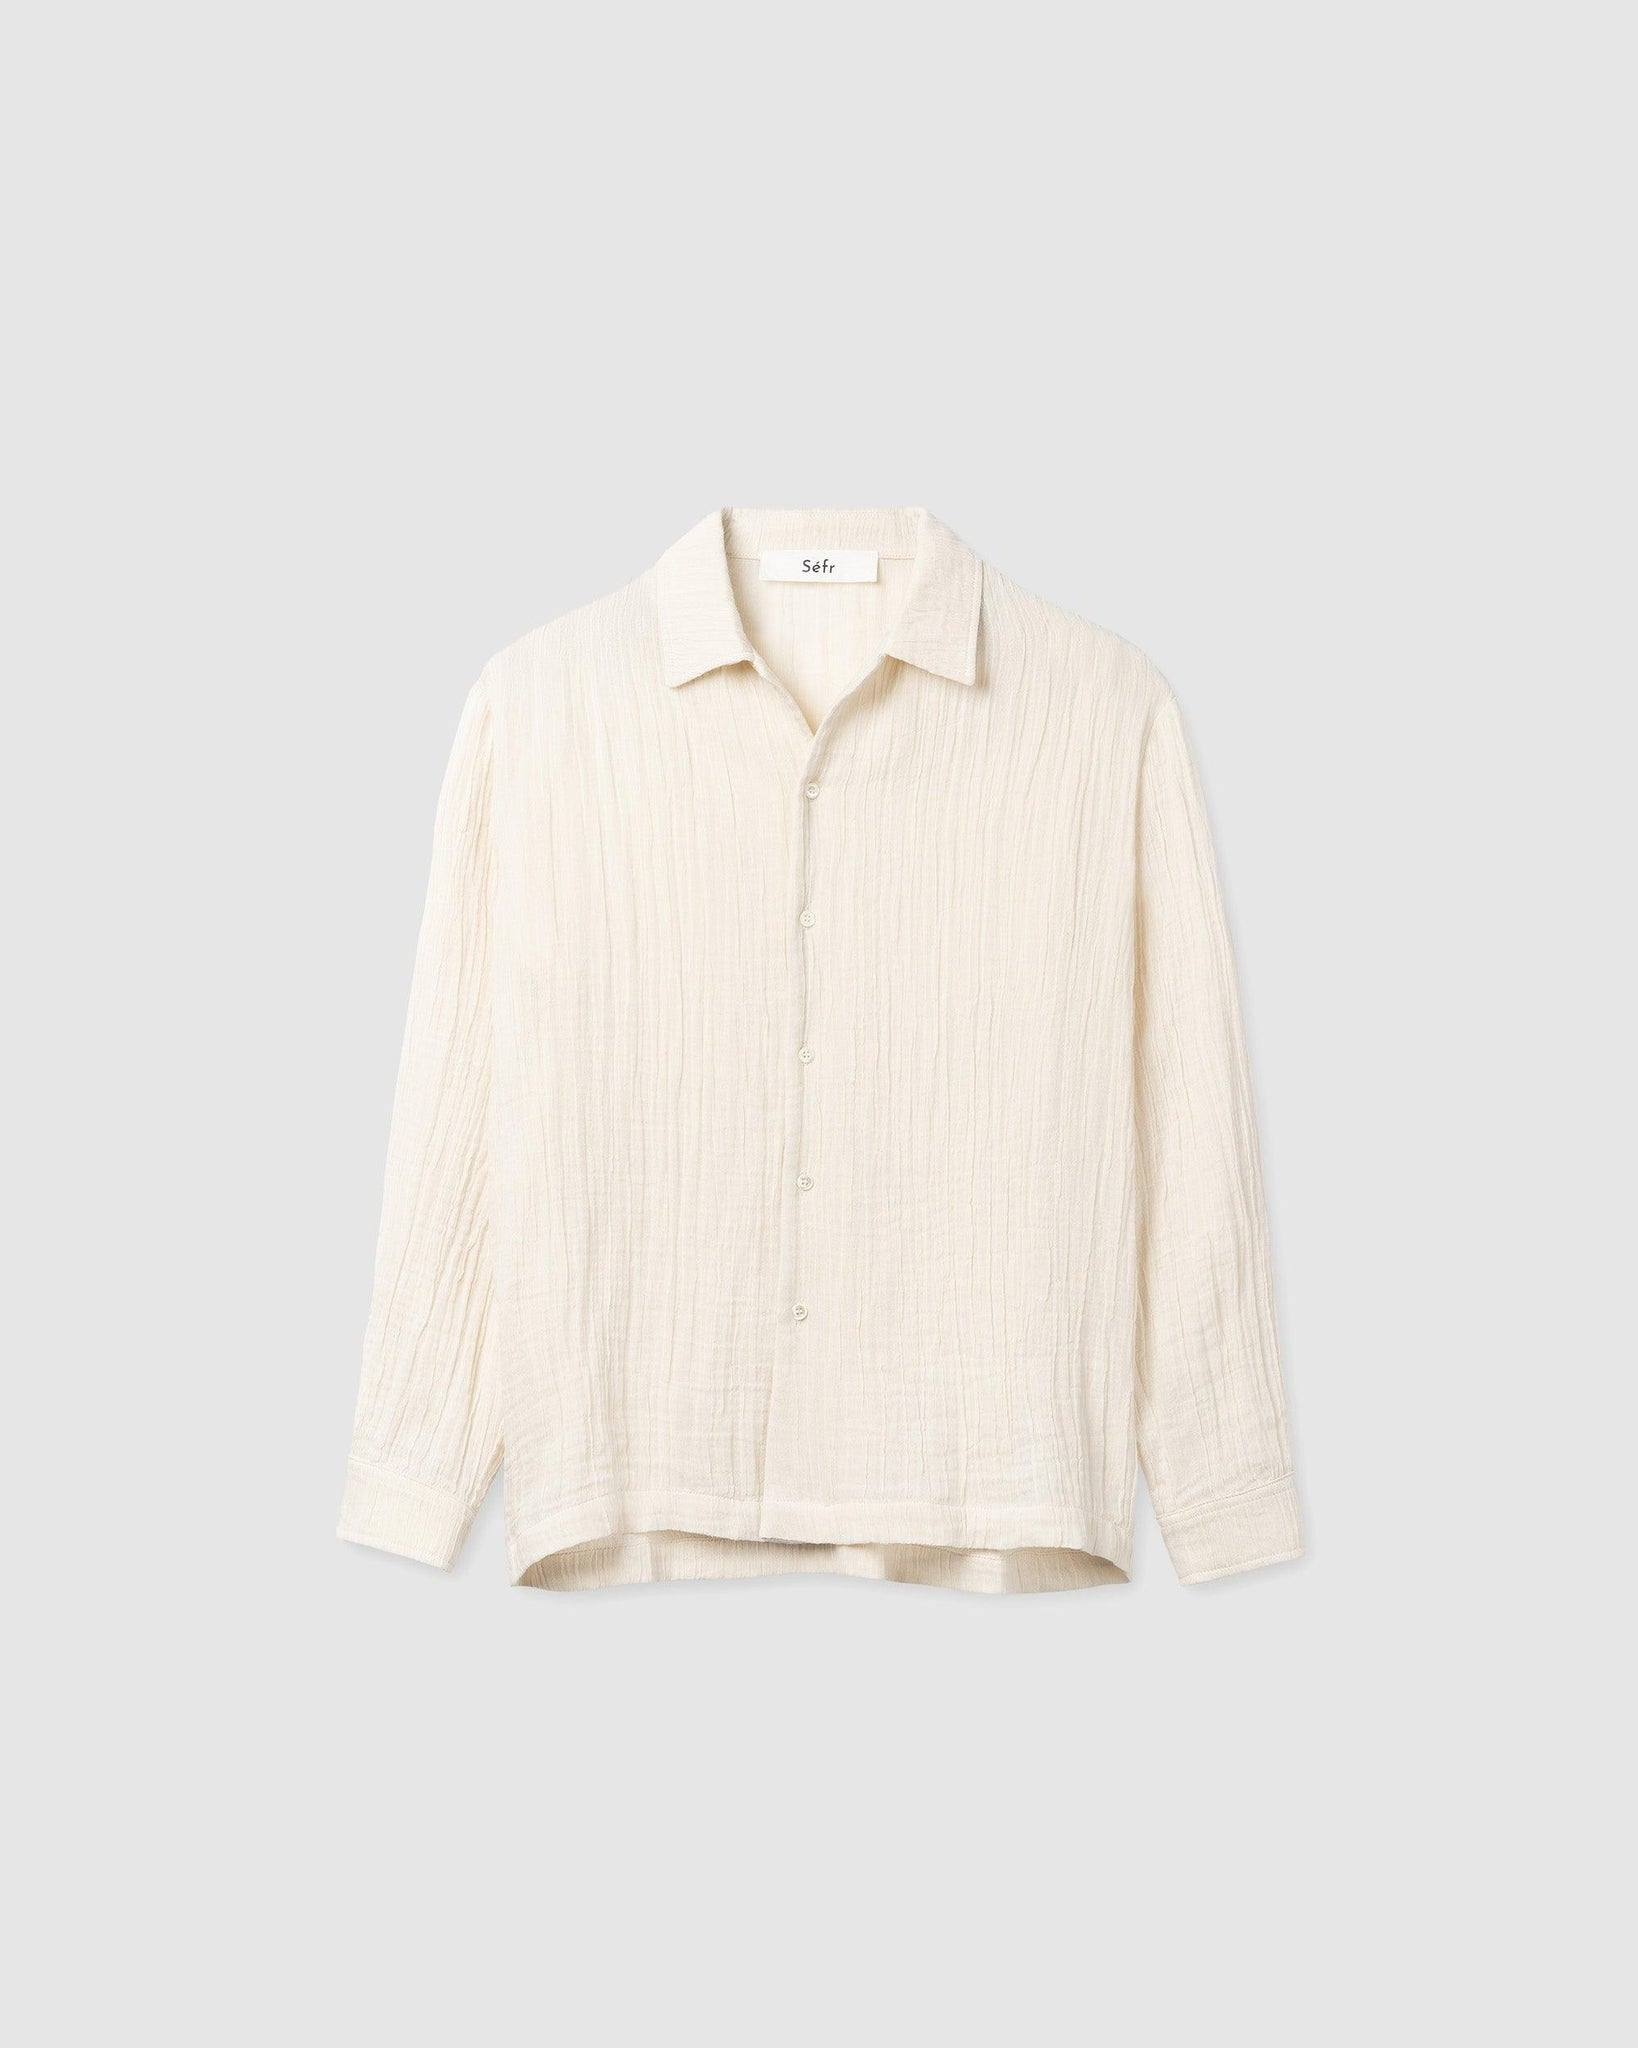 Ripley Shirt Pleated White Cloth - {{ collection.title }} - Chinatown Country Club 